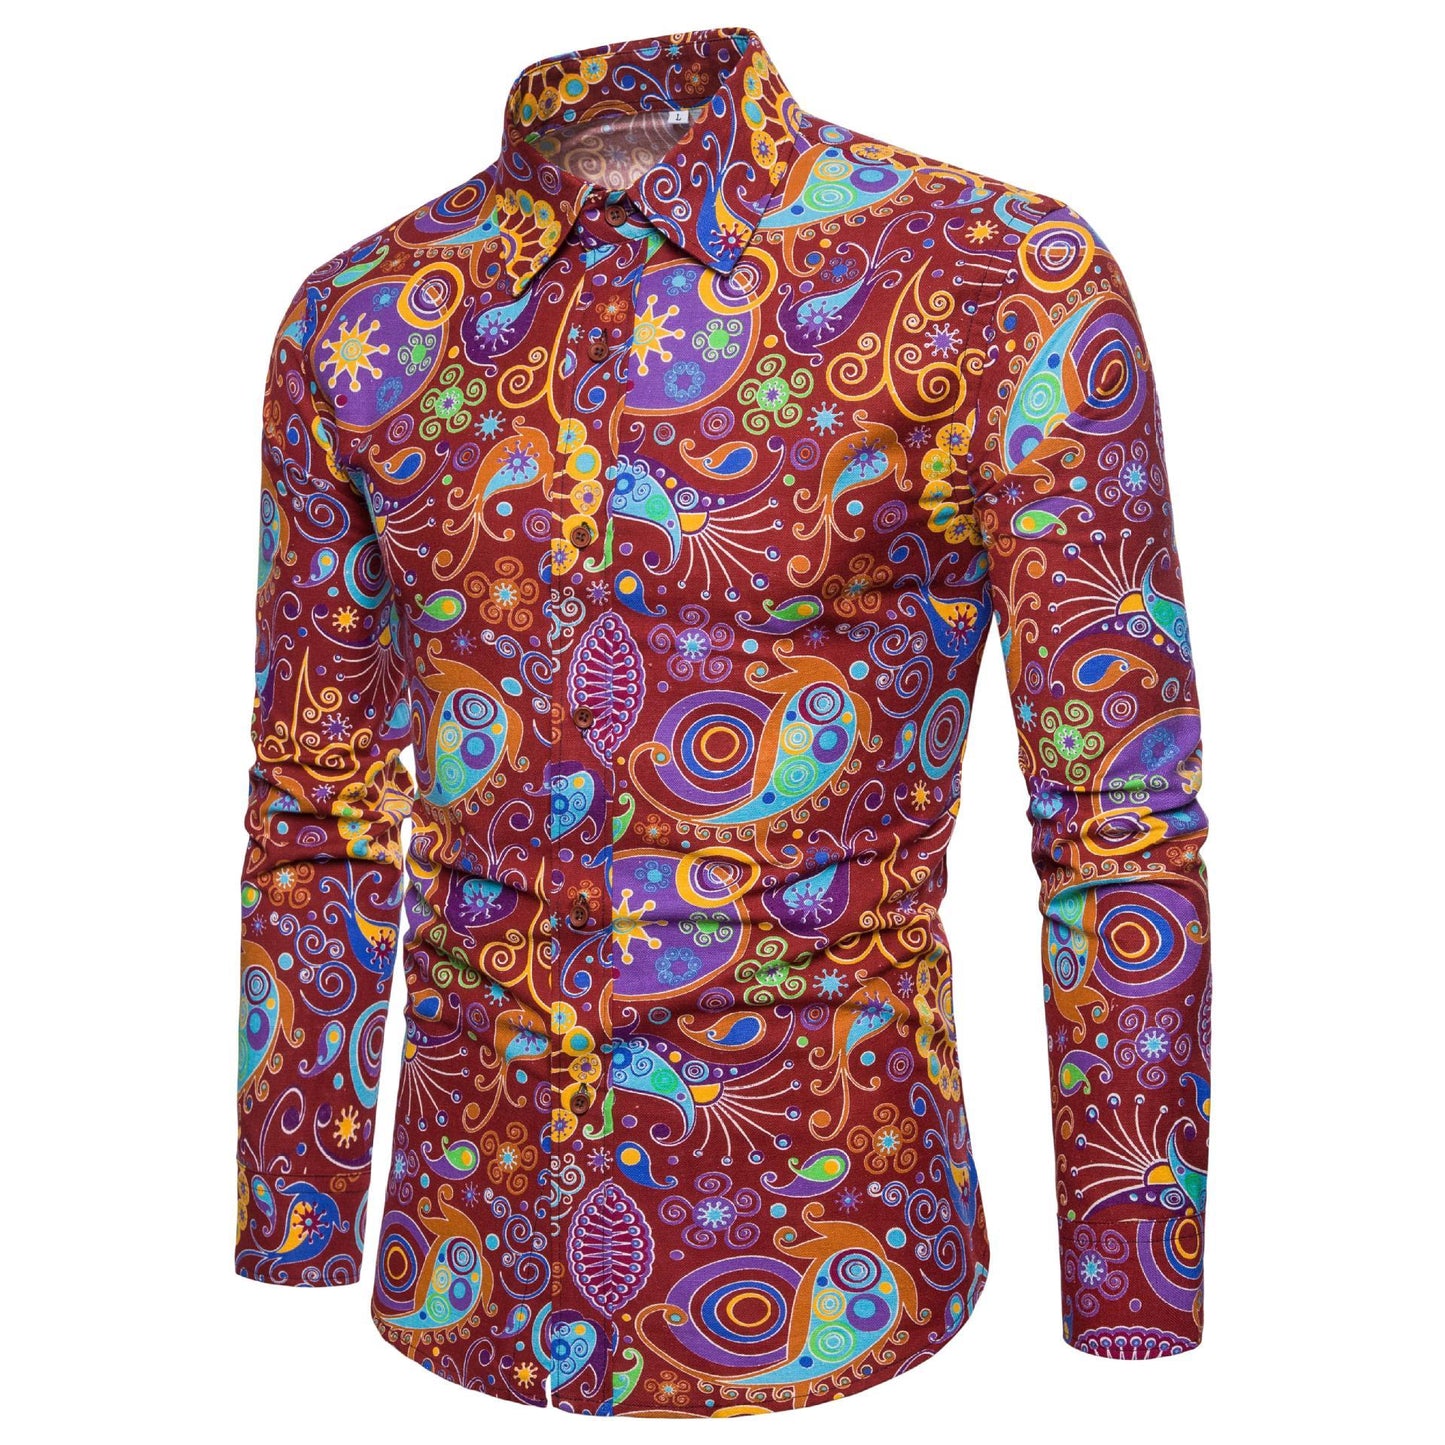 Level Up Your Look: Men's Long Sleeve Shirt (Trendy Prints). Elevate your casual style with our collection of fashionable long-sleeve shirts.